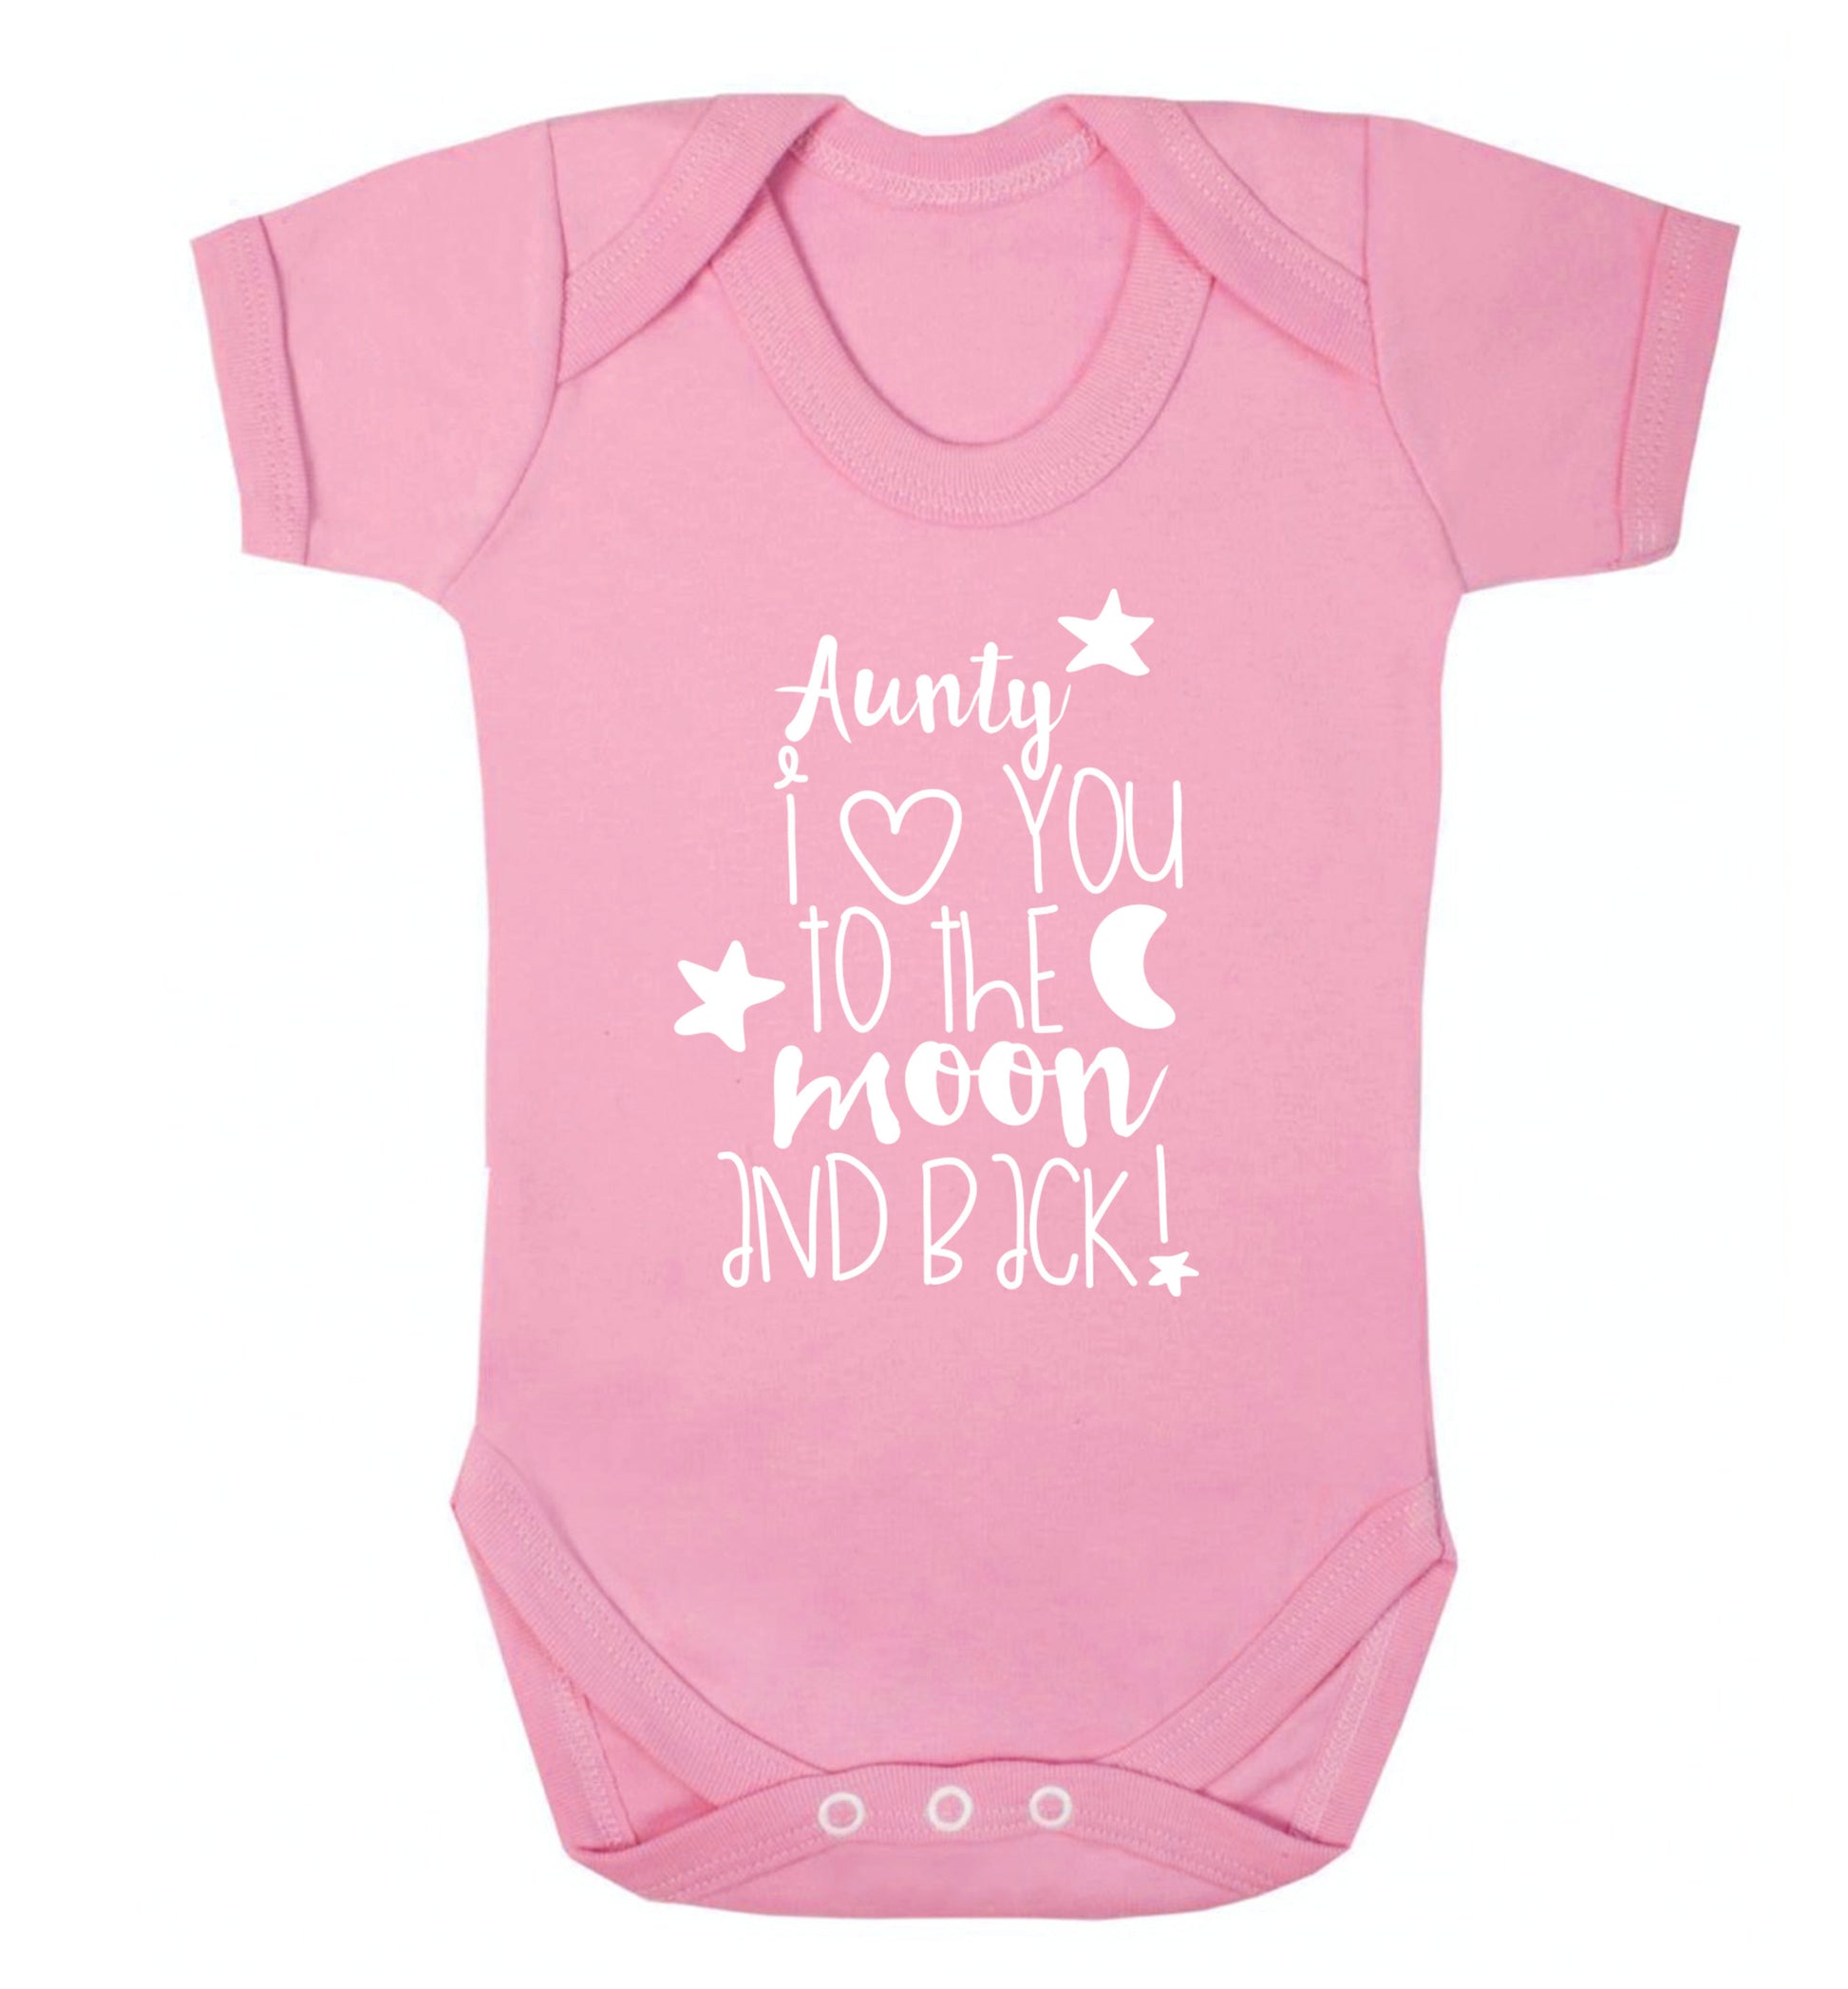 Aunty I love you to the moon and back Baby Vest pale pink 18-24 months